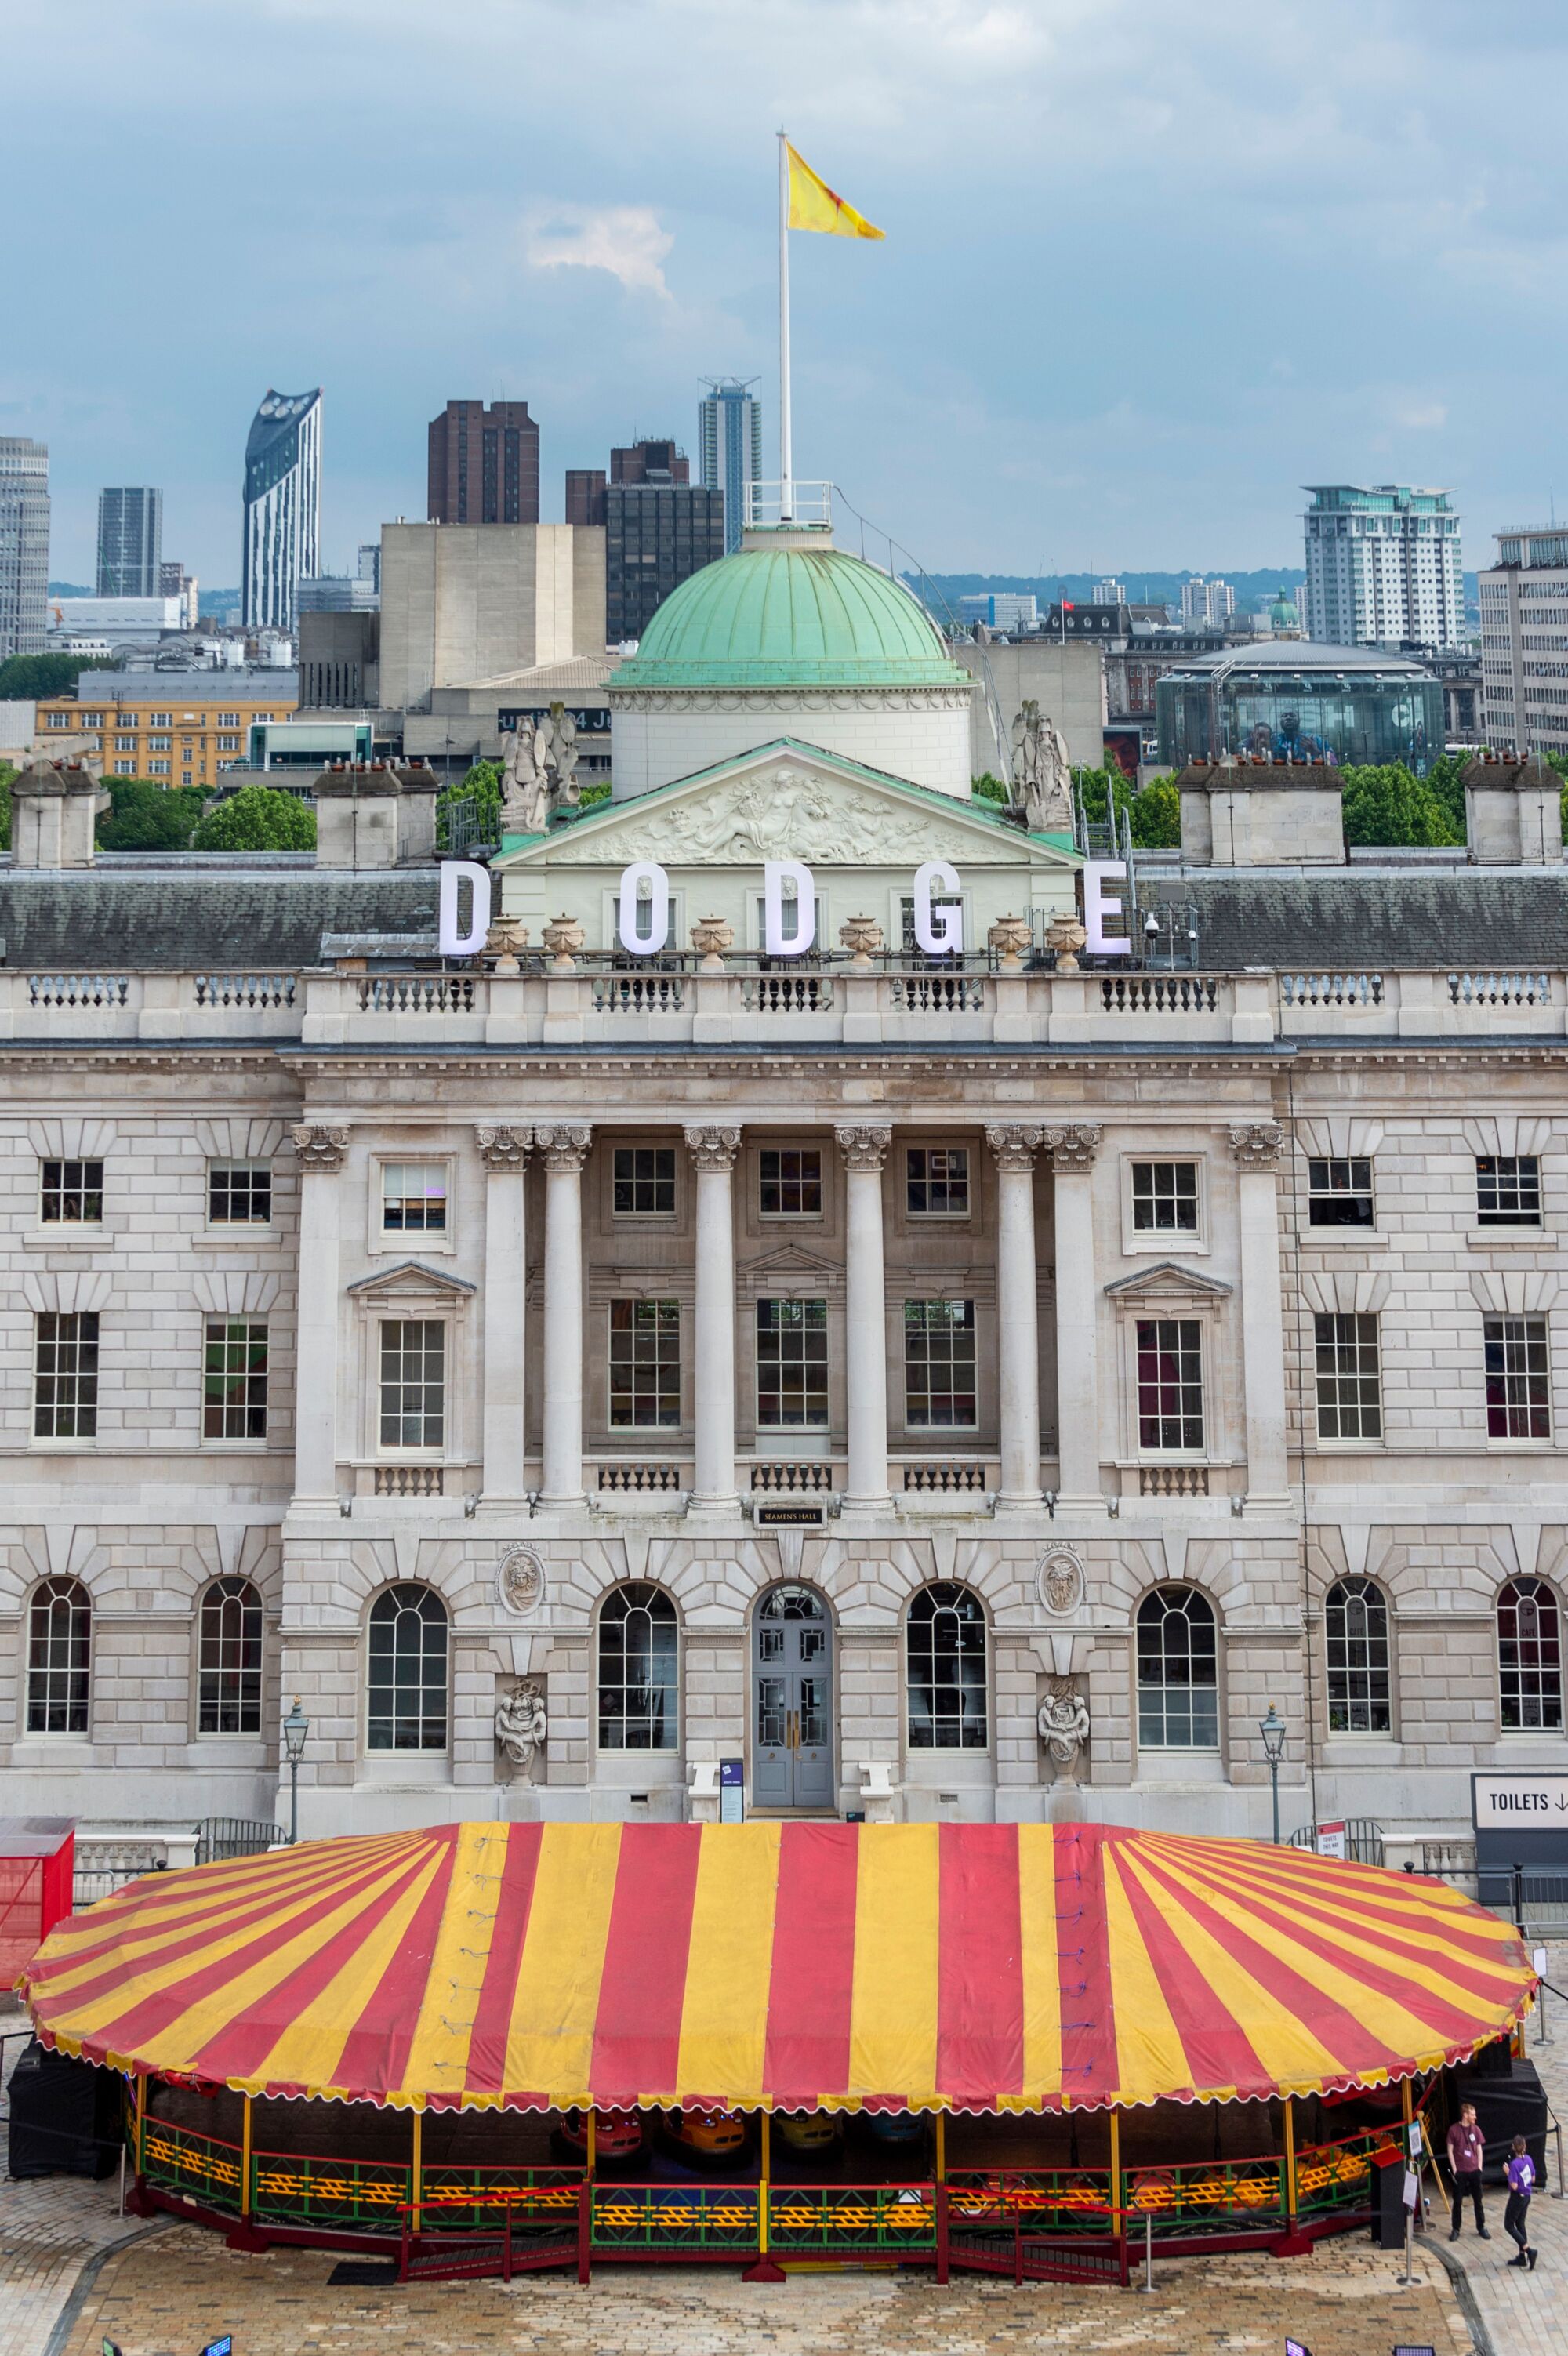 The Wick - Dodge at Somerset House, Image: Stephen Chung